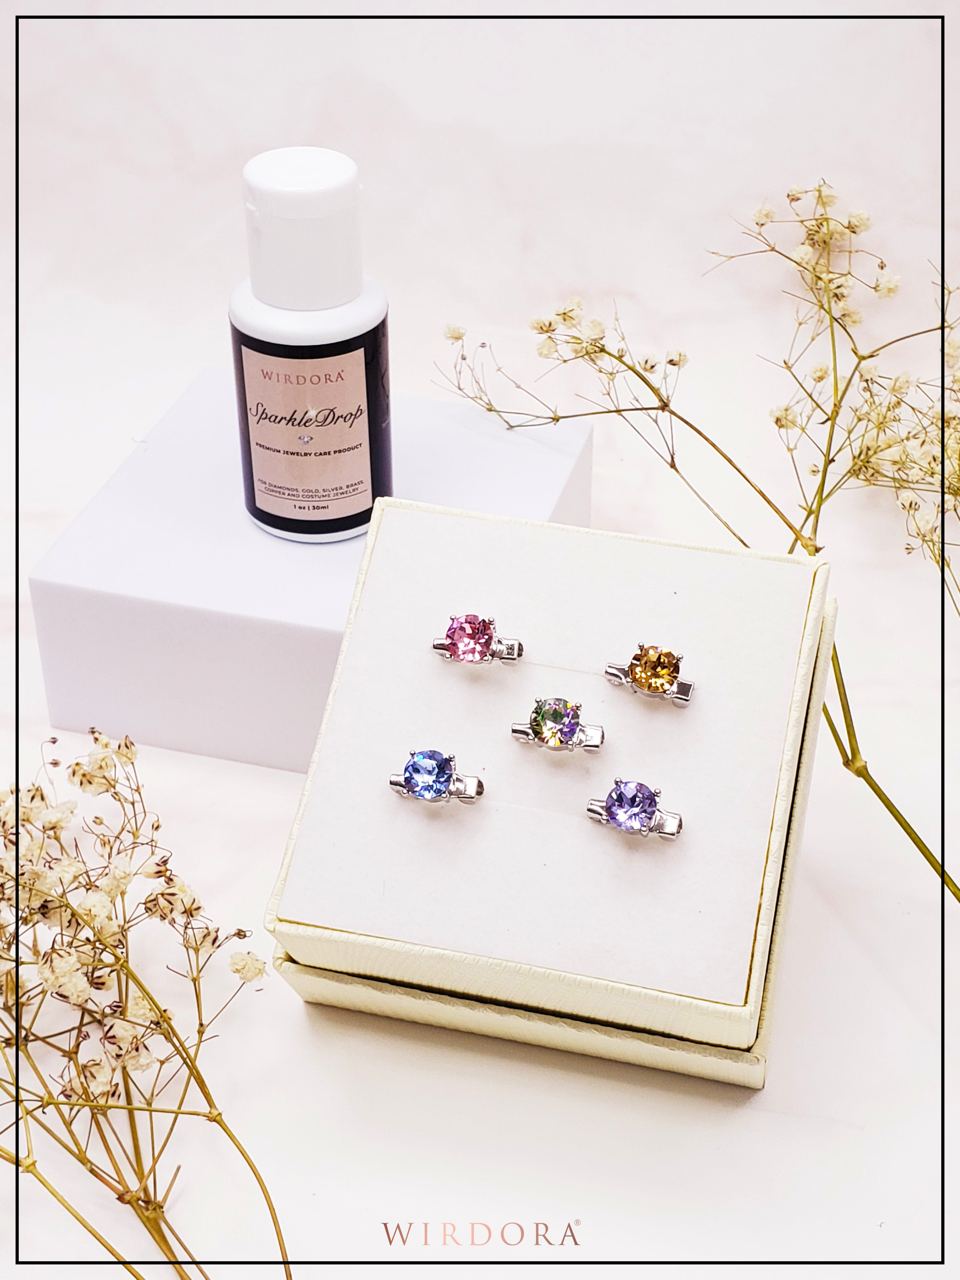 Make Your Wirdora Sparkle Last: Tips To Care And Clean Your Jewelry